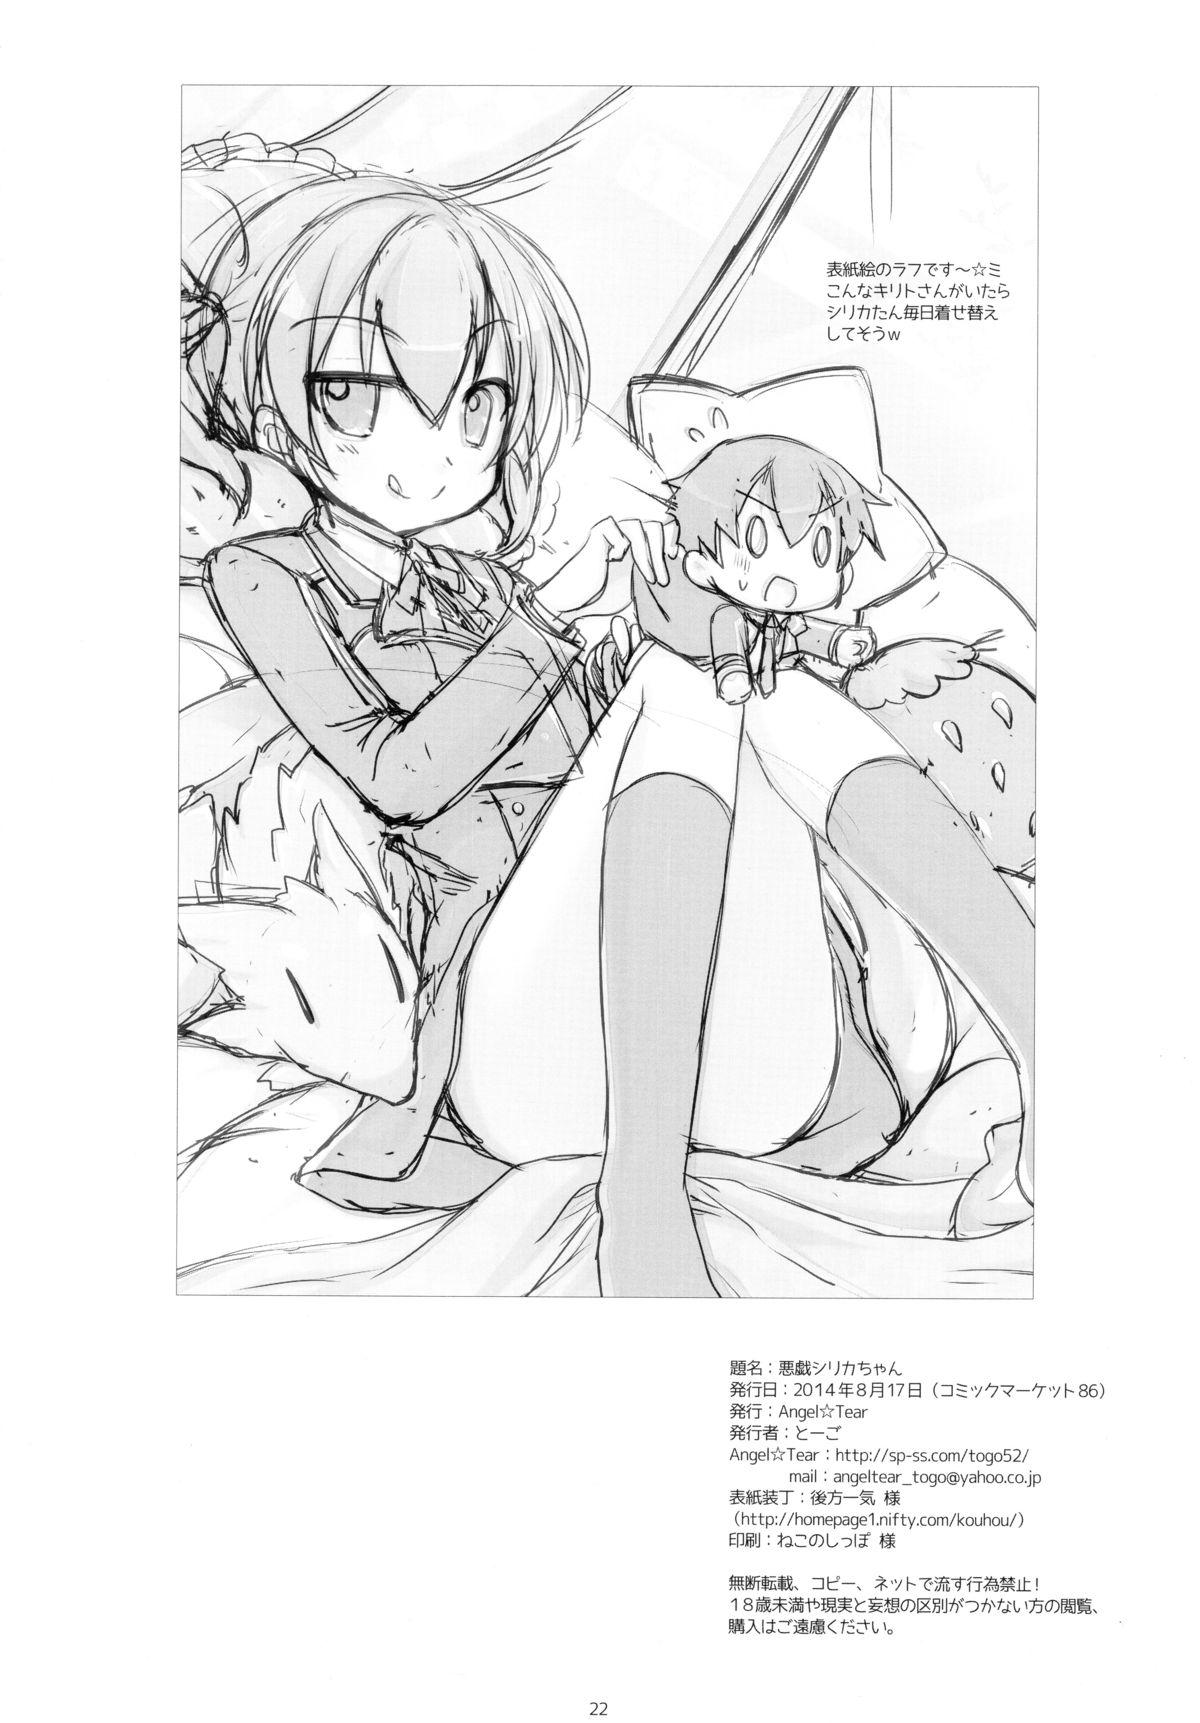 Rimming Itazura Silica-chan - Sword art online Handsome - Page 22